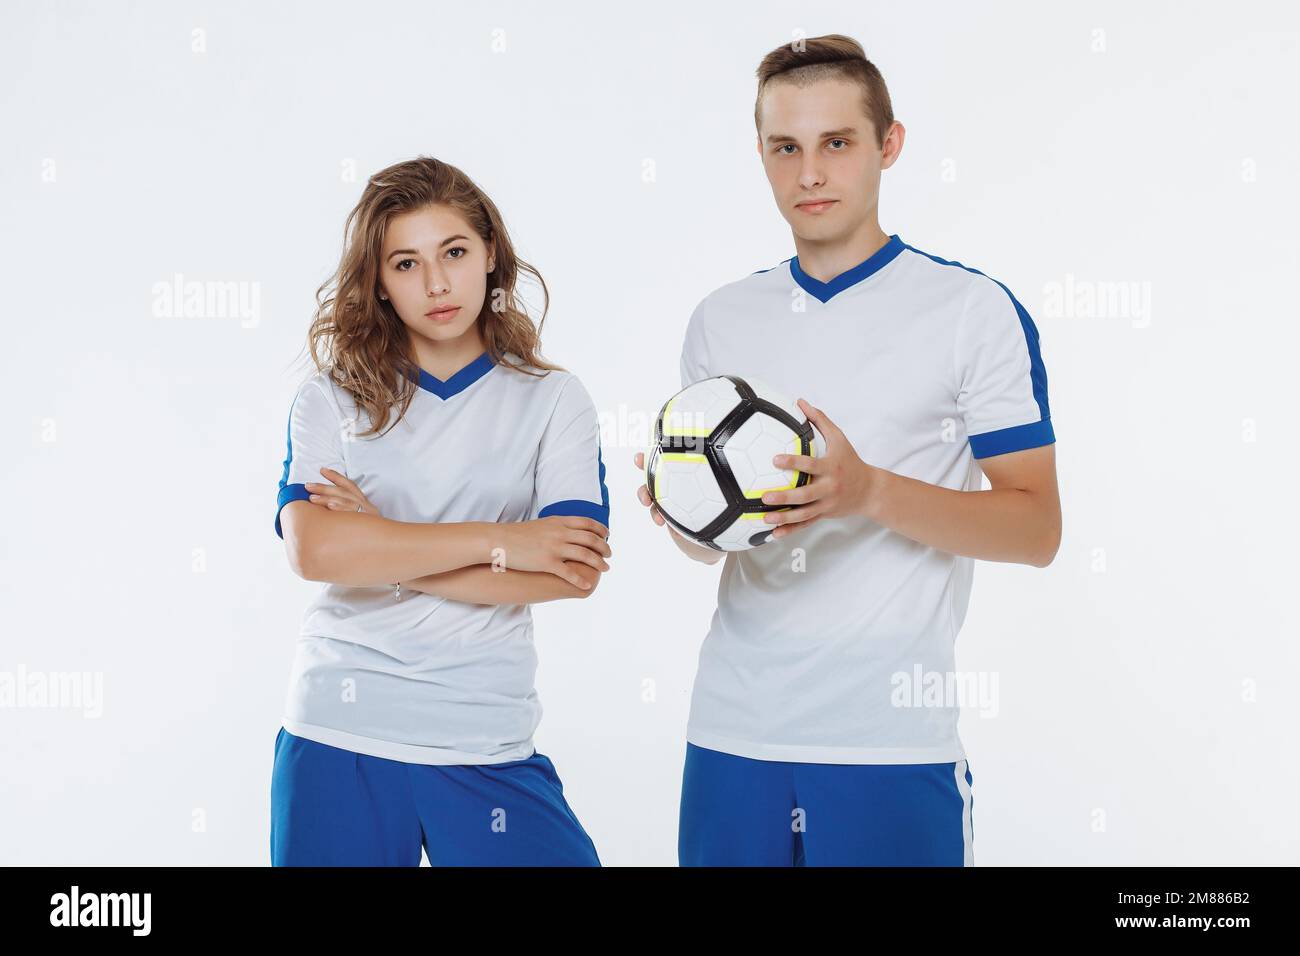 Soccer player and a girl footballer in a white uniform with a ball isolated Stock Photo